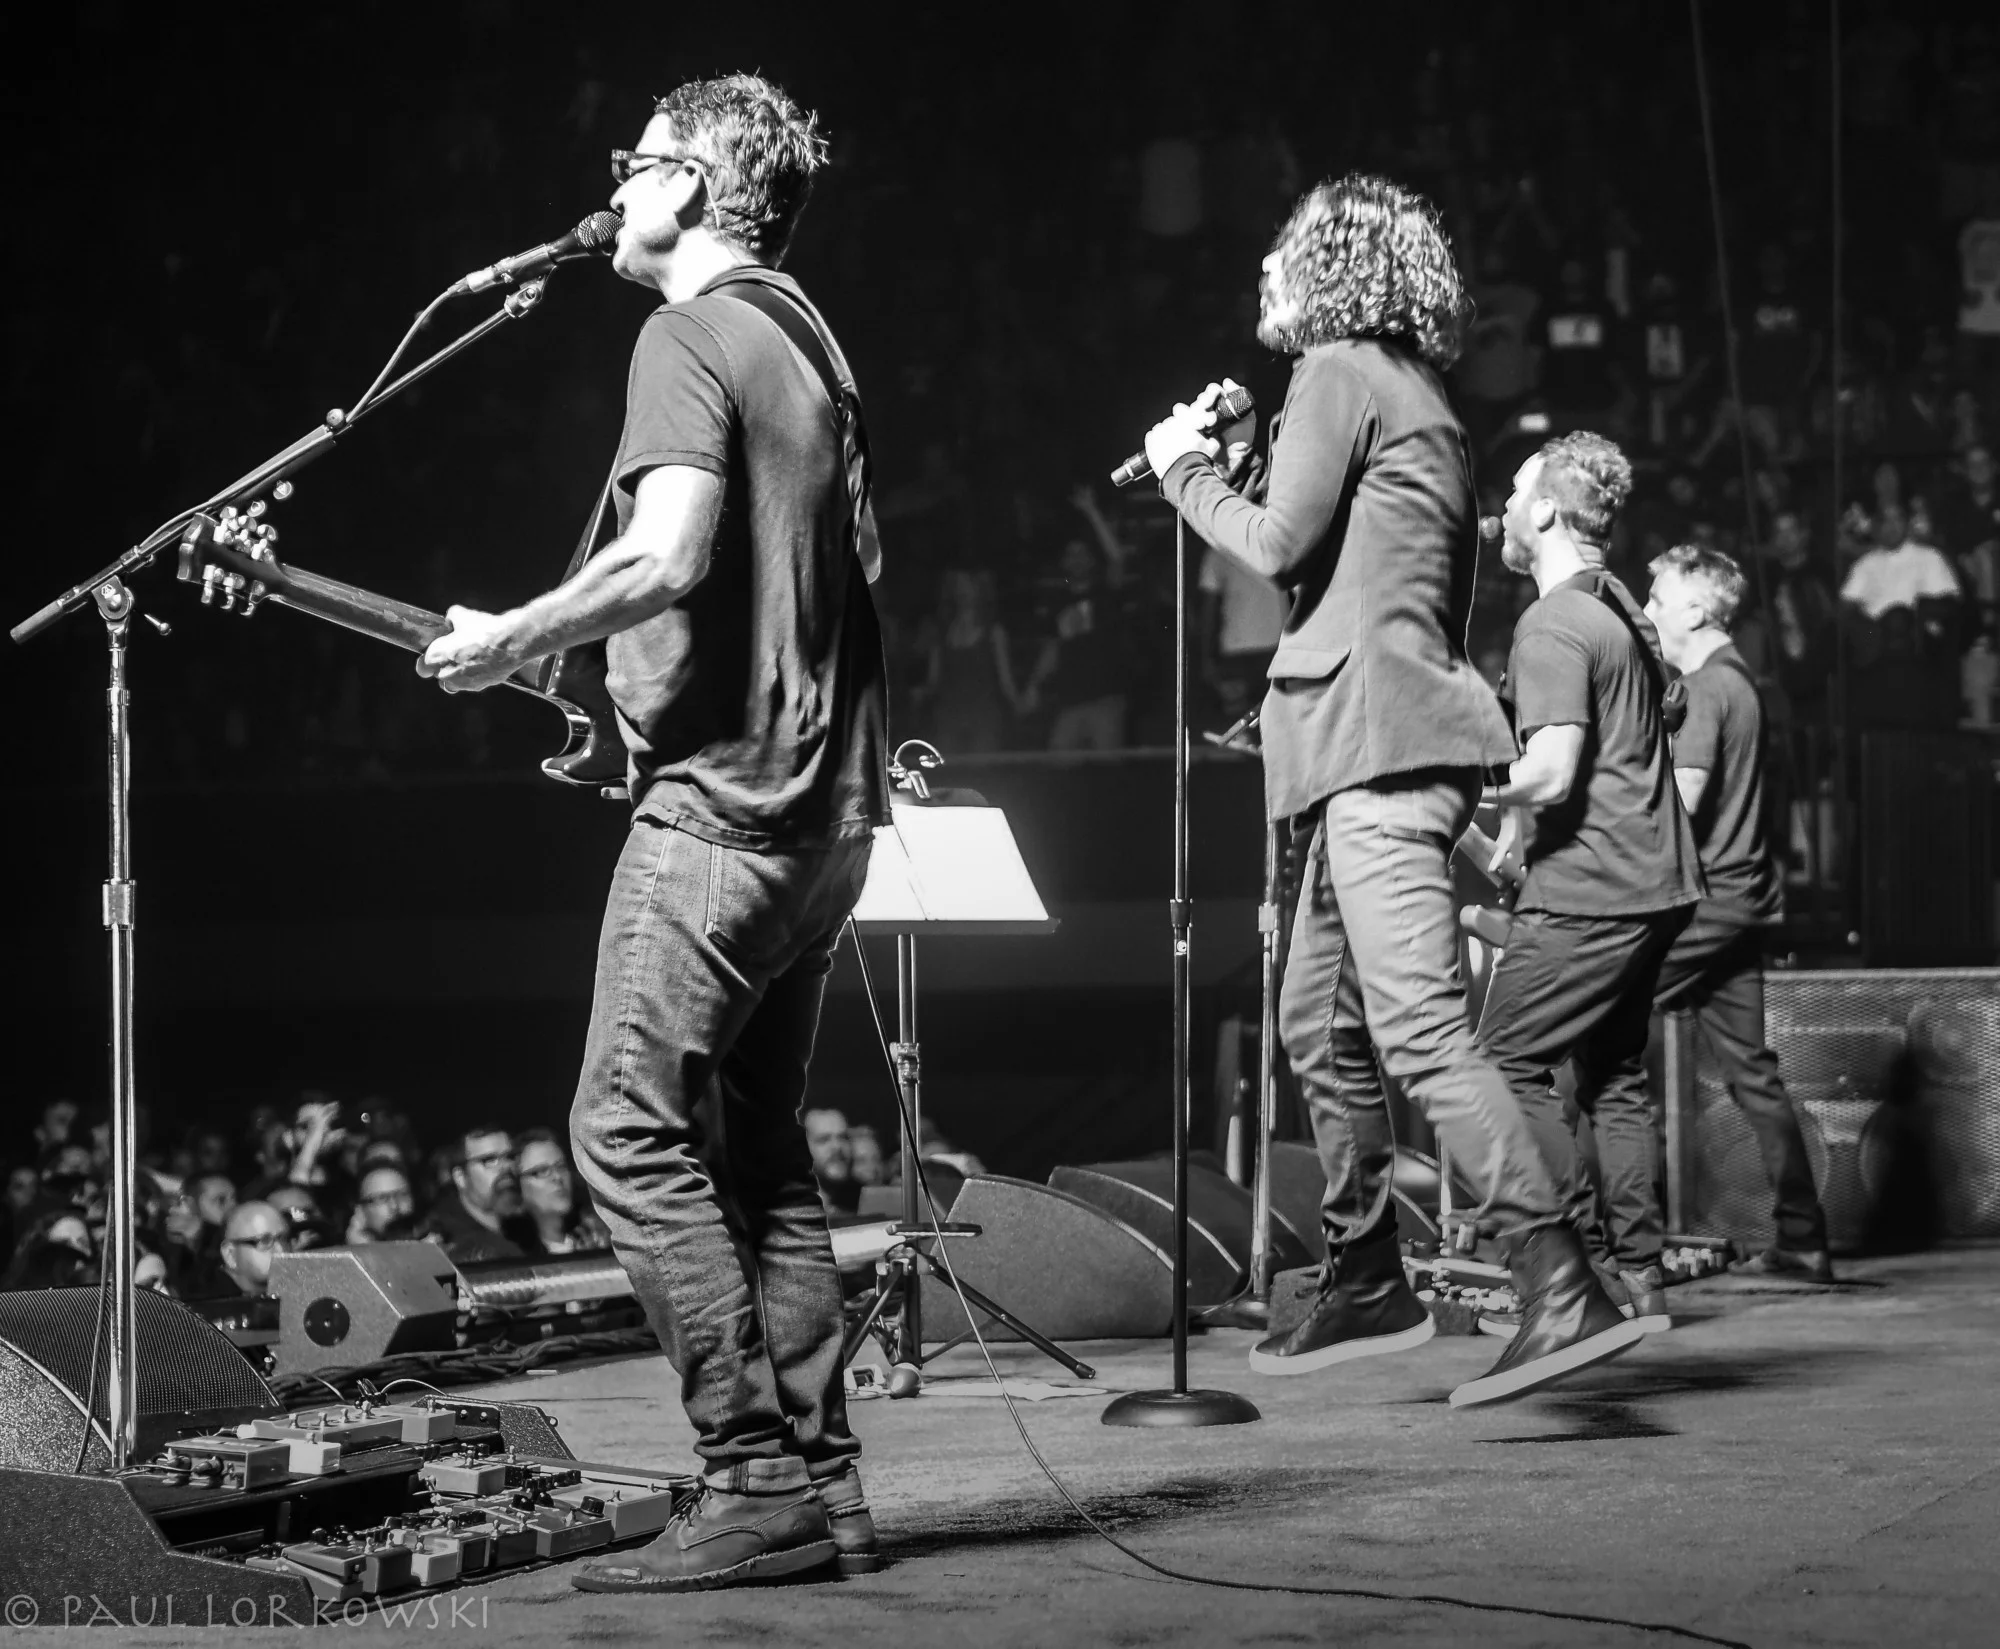 Remembering the Temple of the Dog Tour in 10 Stunning Photos